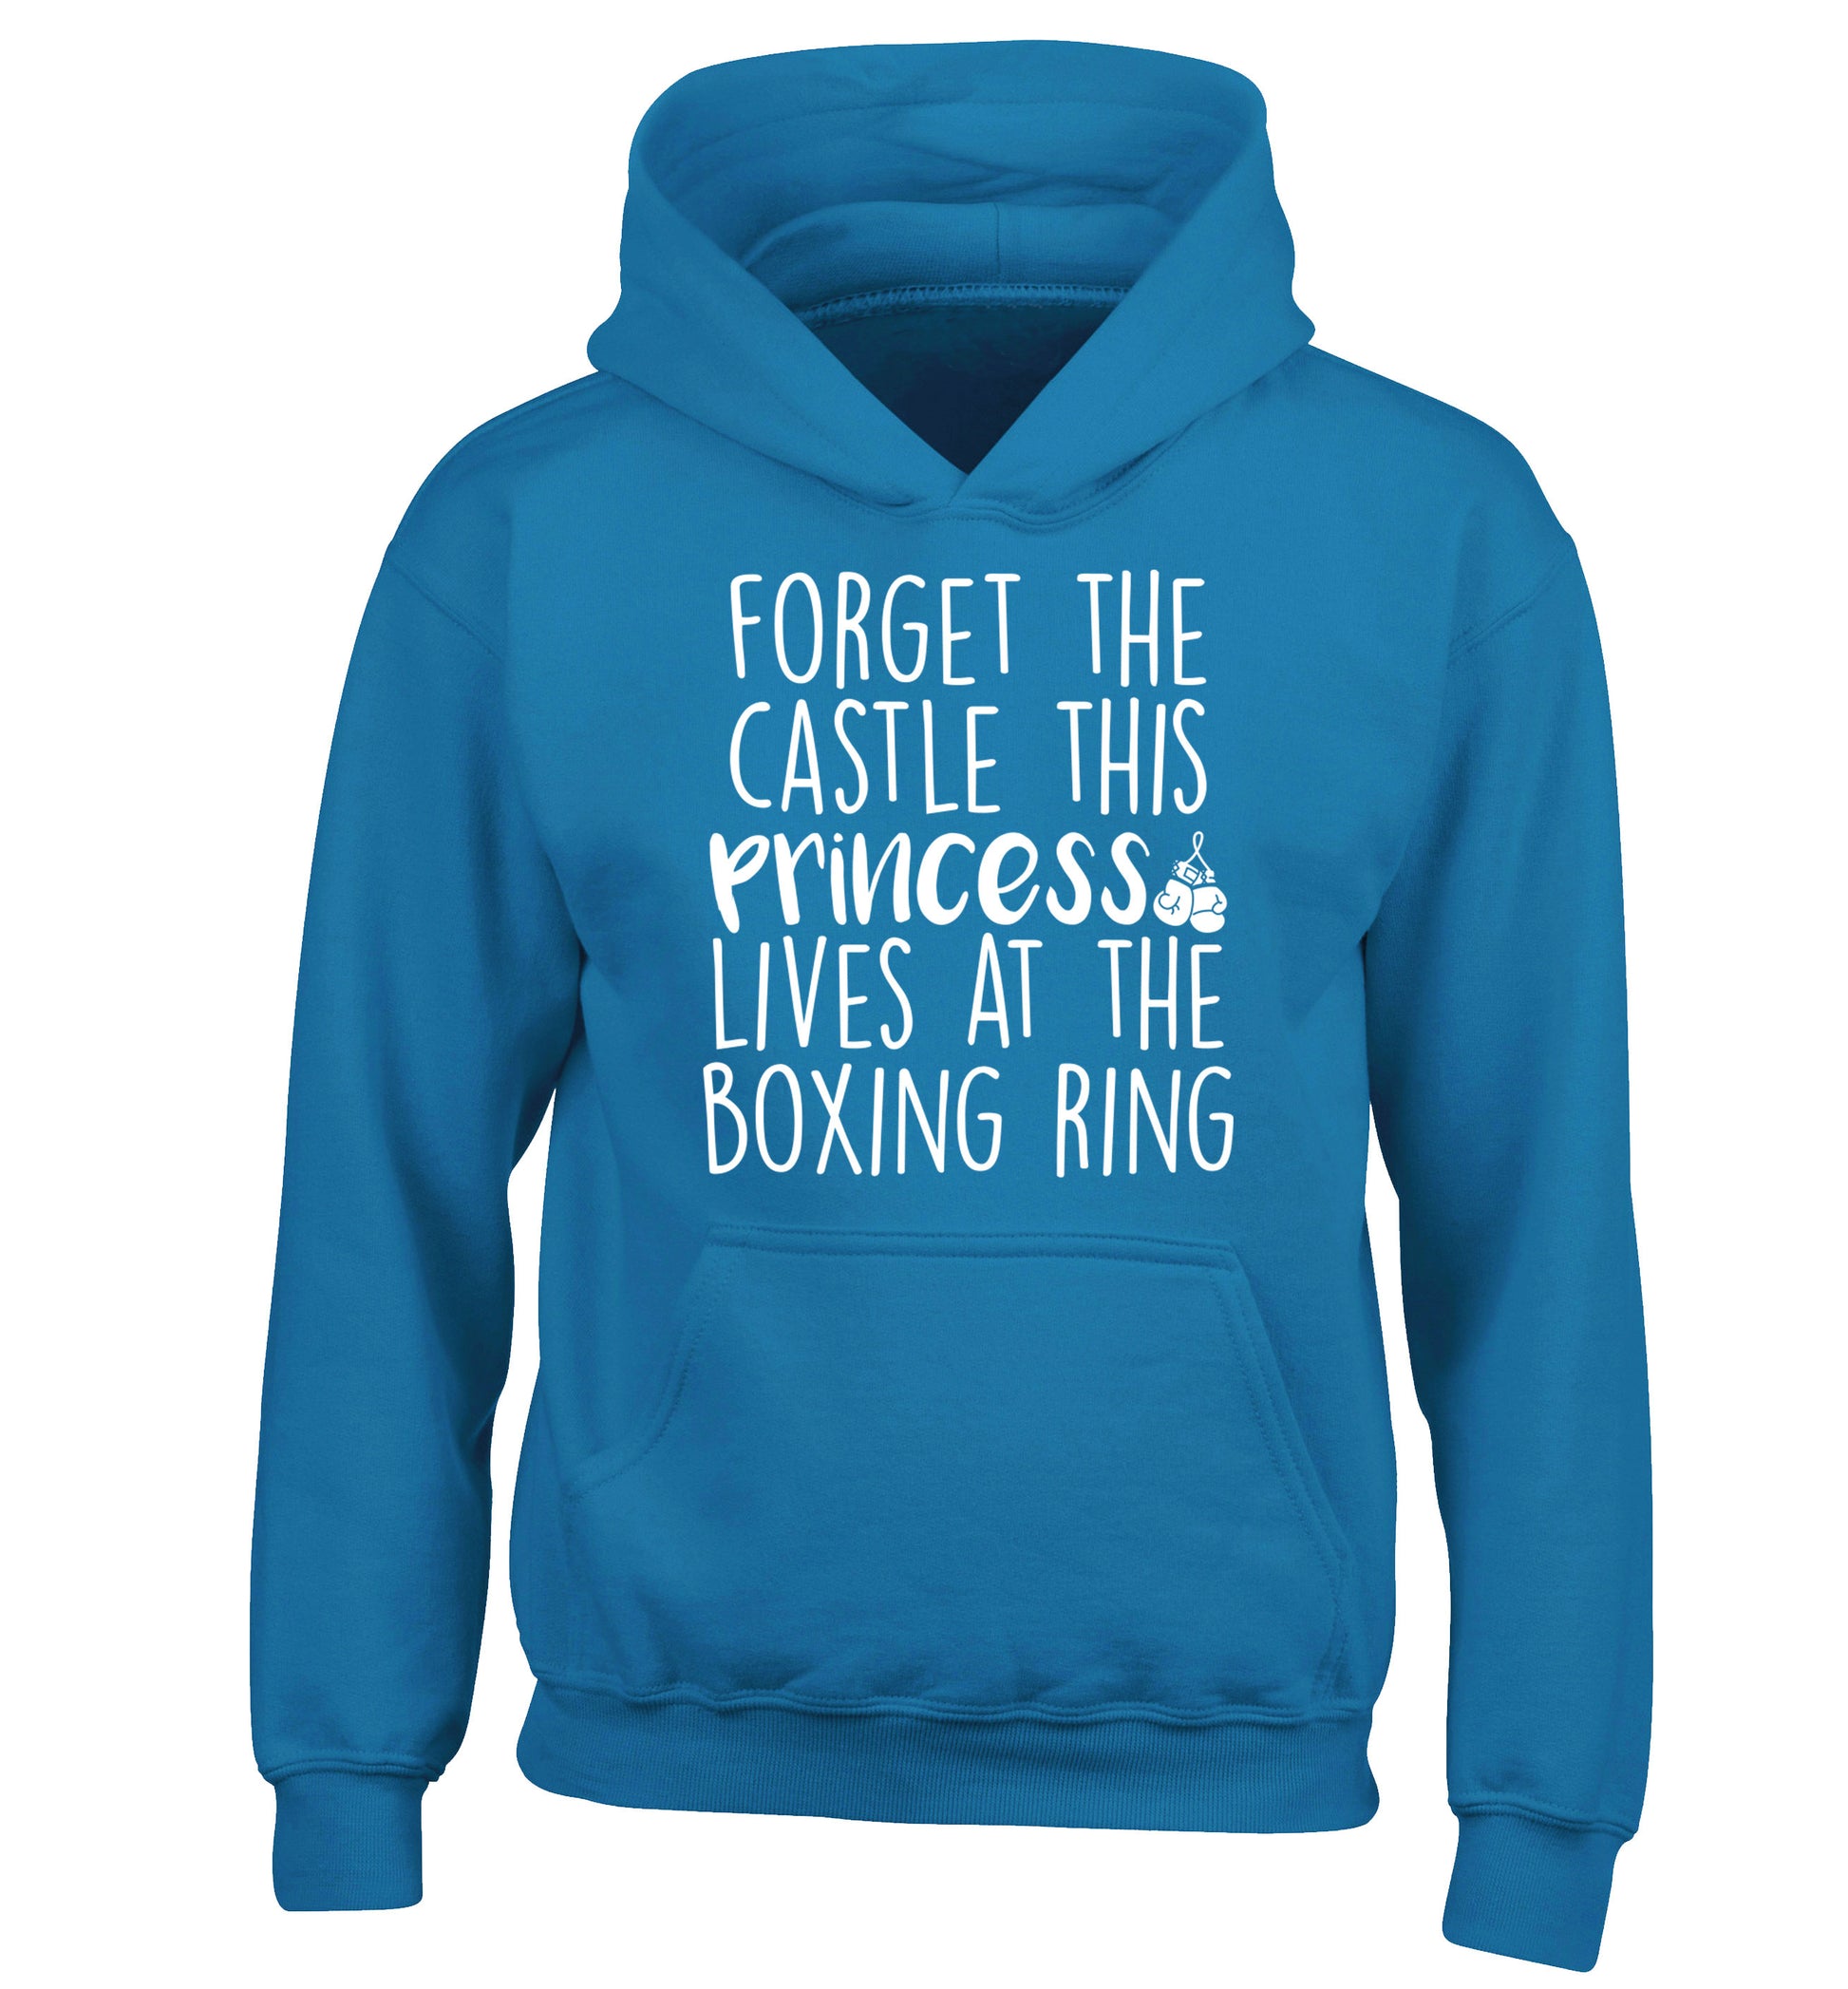 Forget the castle this princess lives at the boxing ring children's blue hoodie 12-14 Years